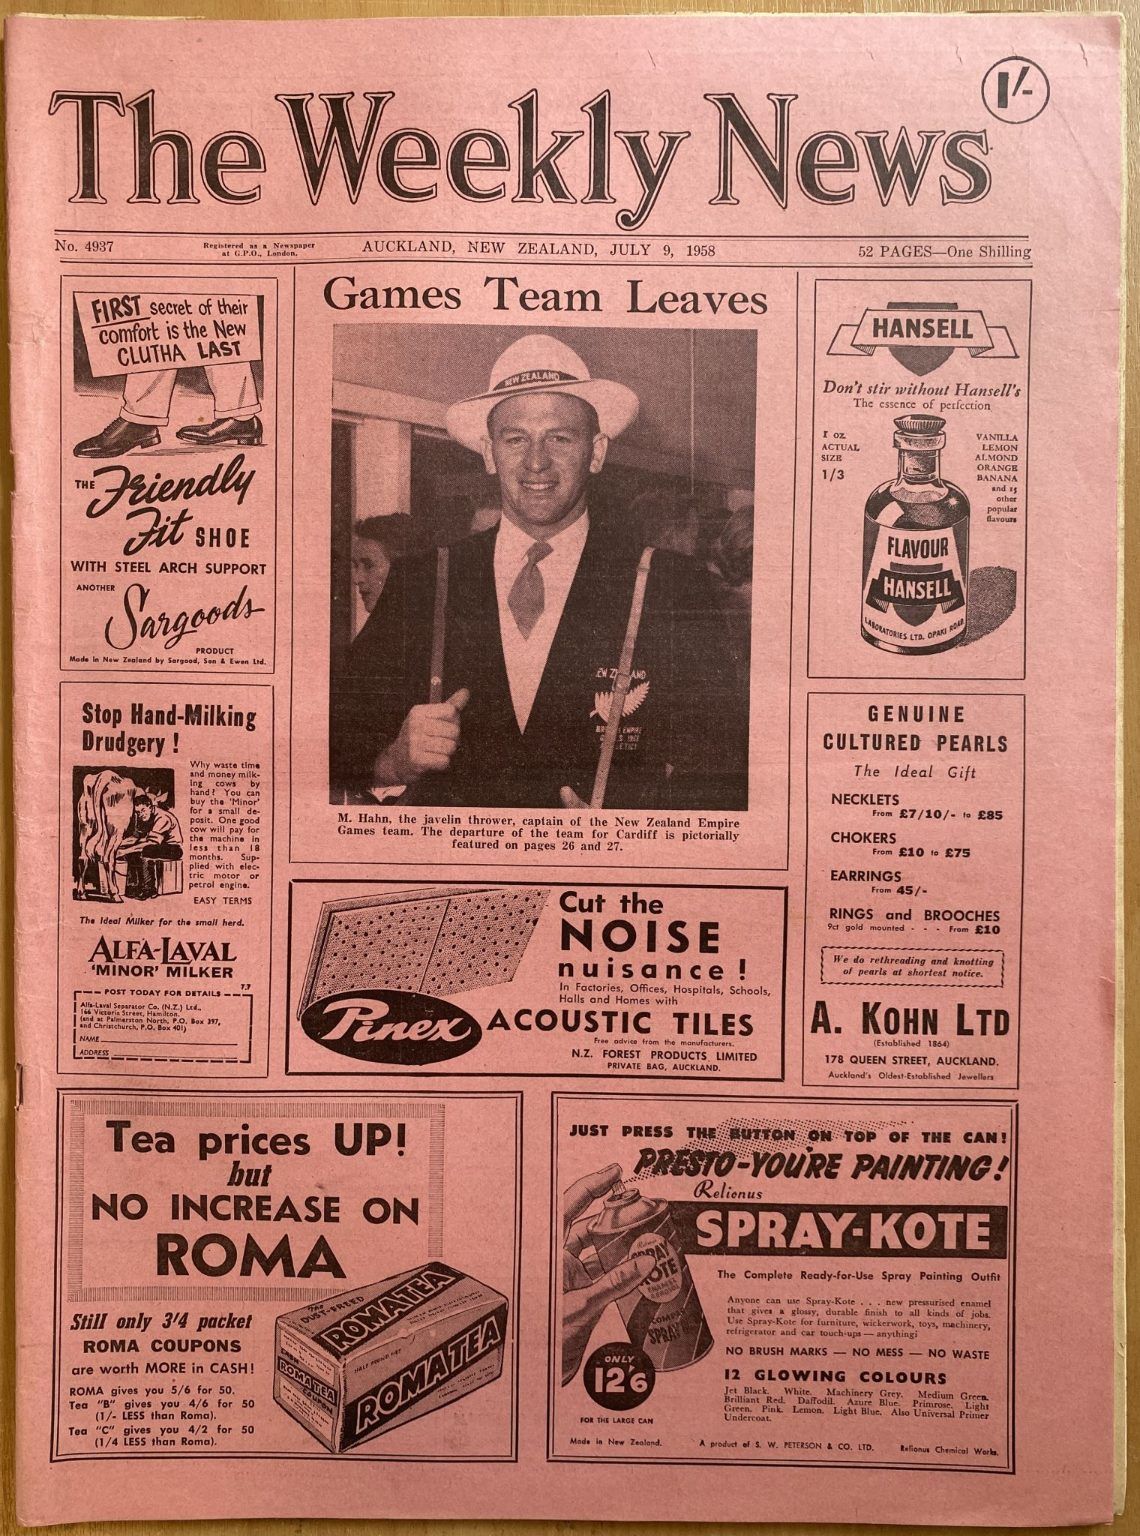 OLD NEWSPAPER: The Weekly News, No. 4937, 9 July 1958